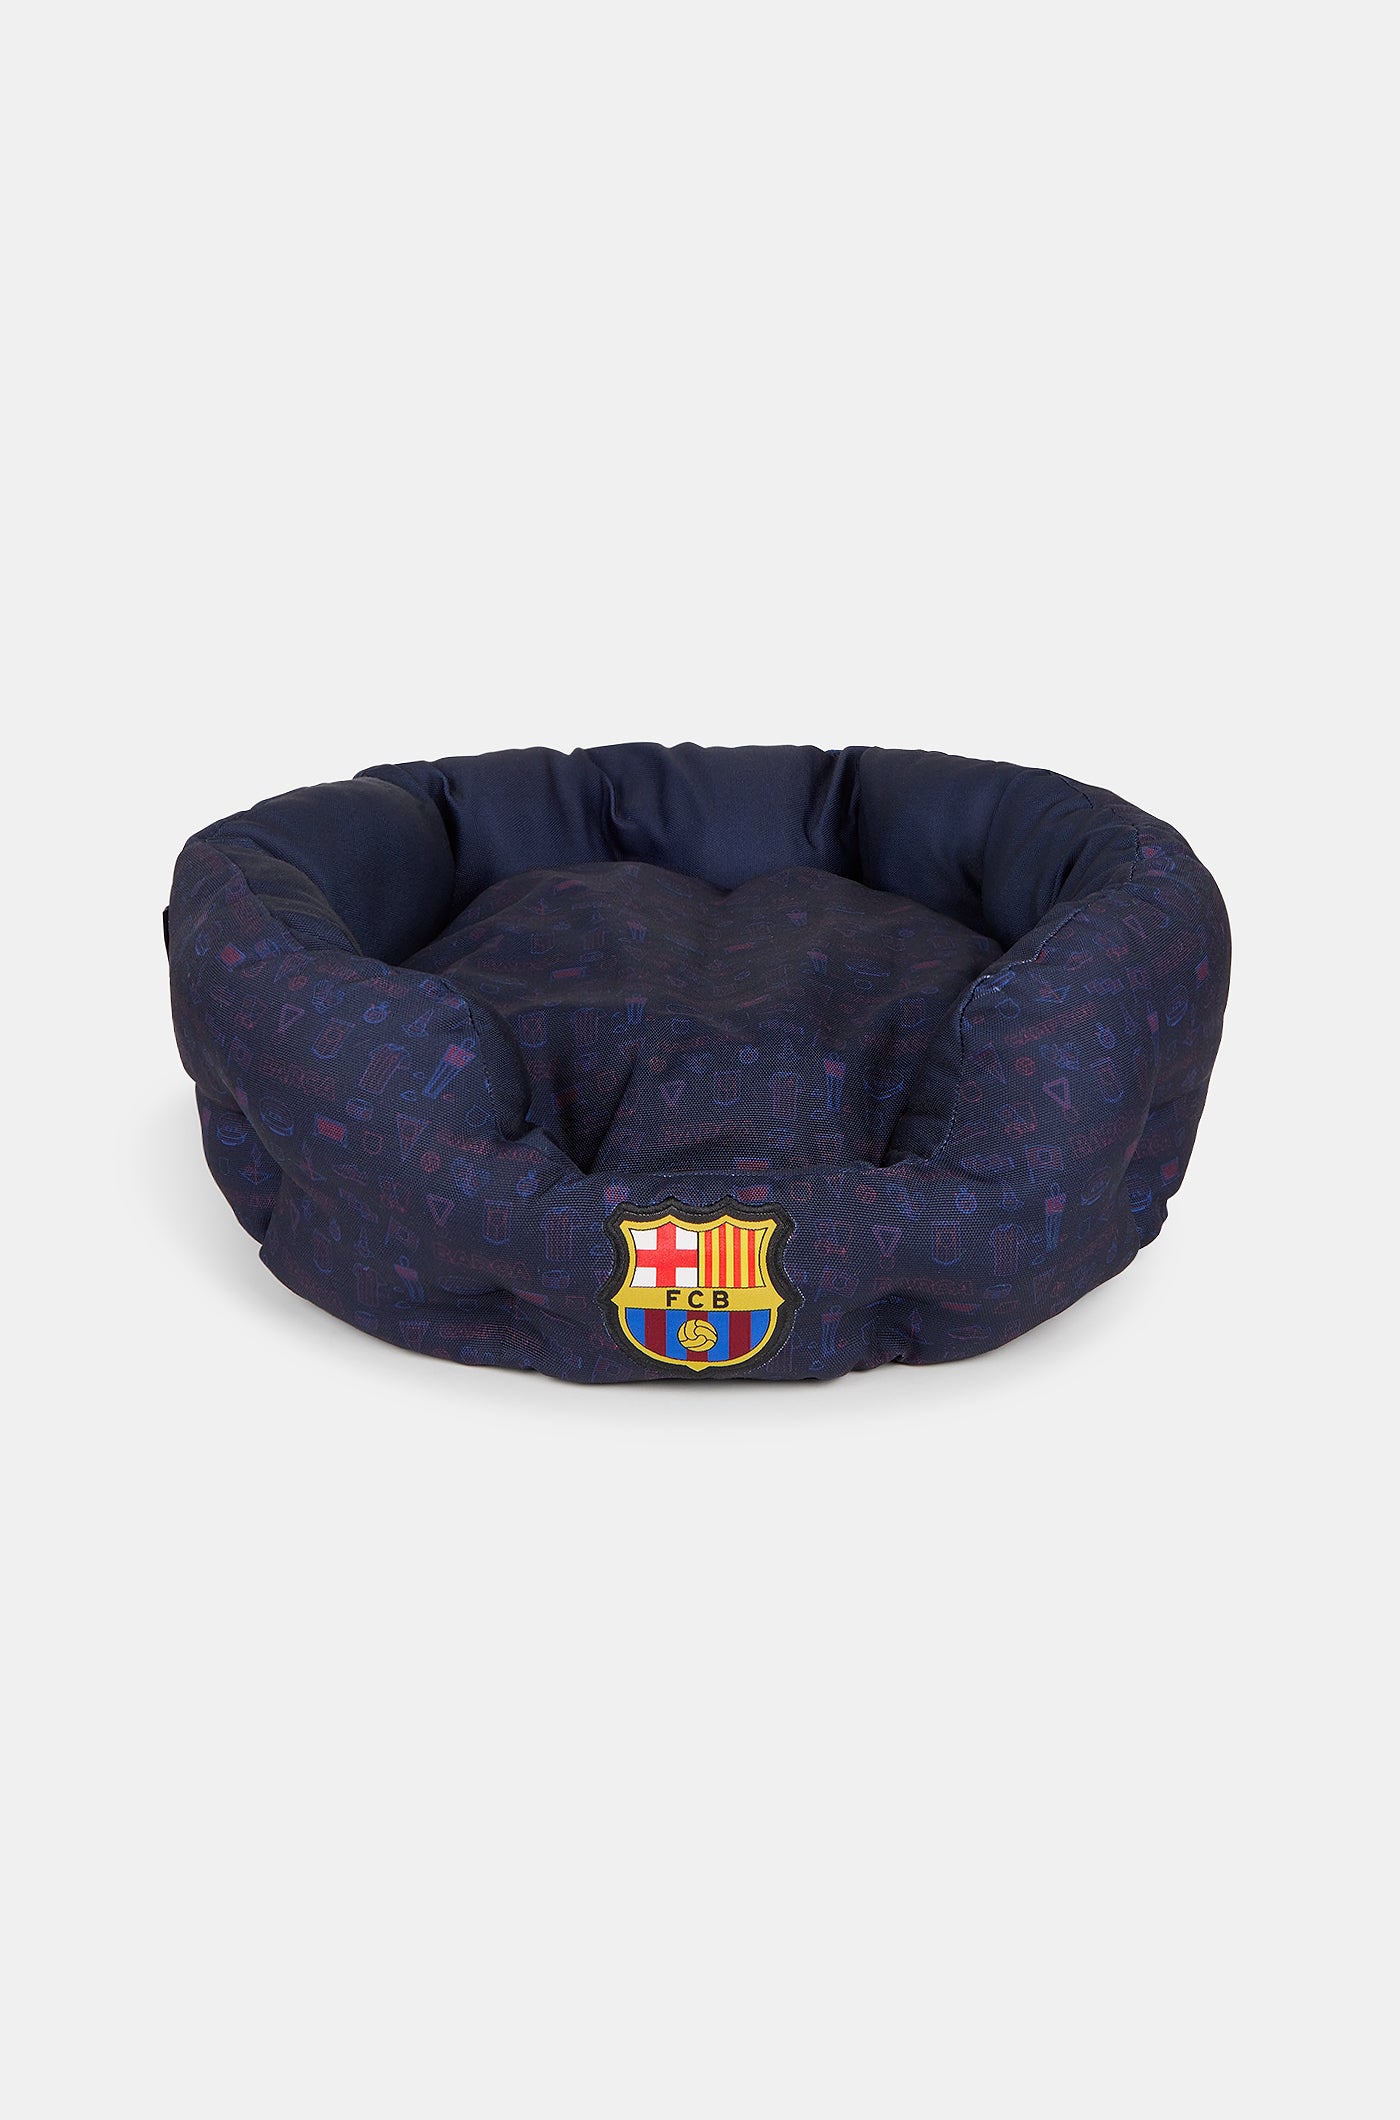 FC Barcelona Bed for Pets - Size M